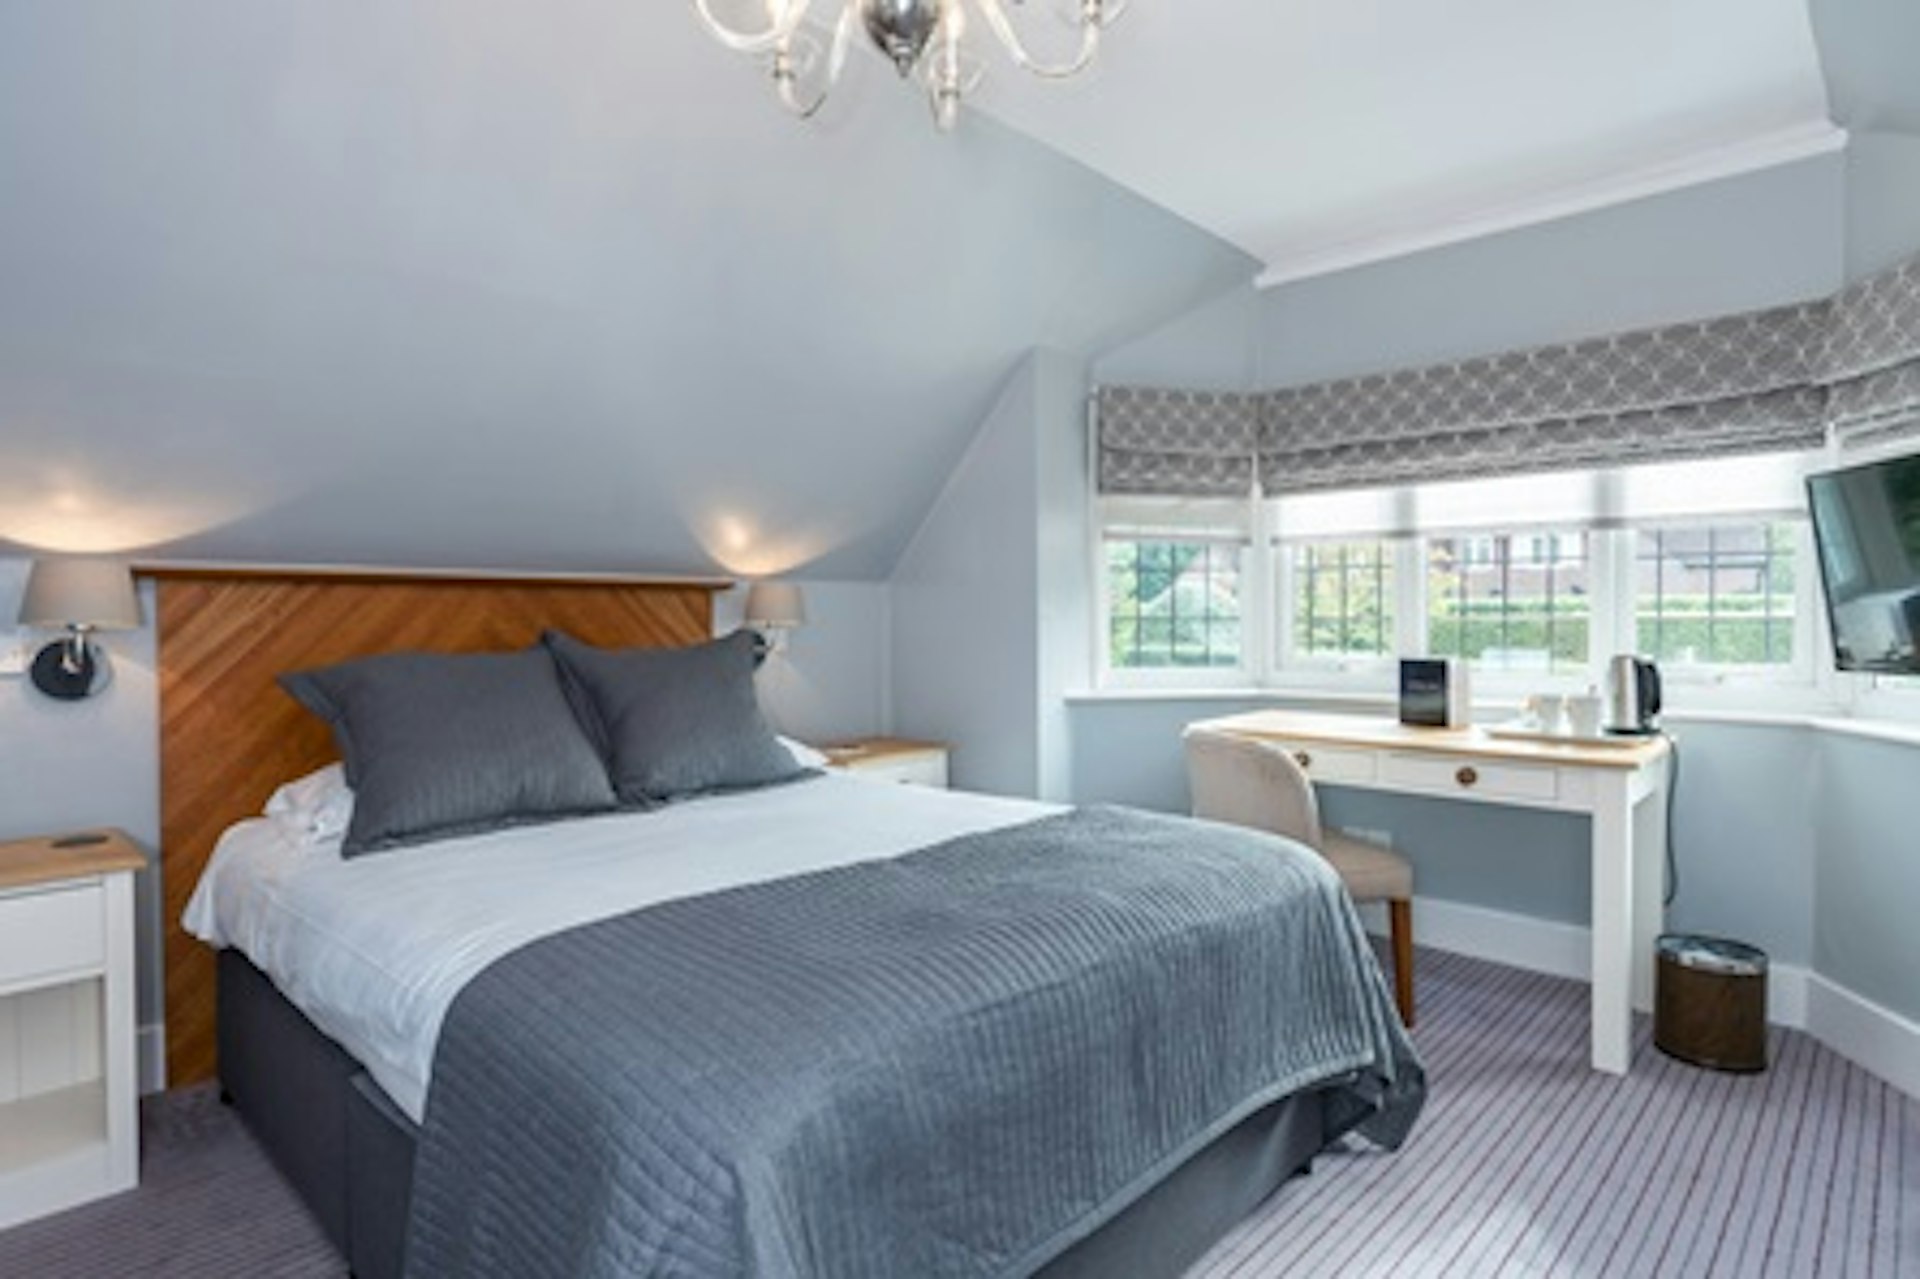 One Night Surrey Countryside Break for Two at the Gorse Hill Hotel 2